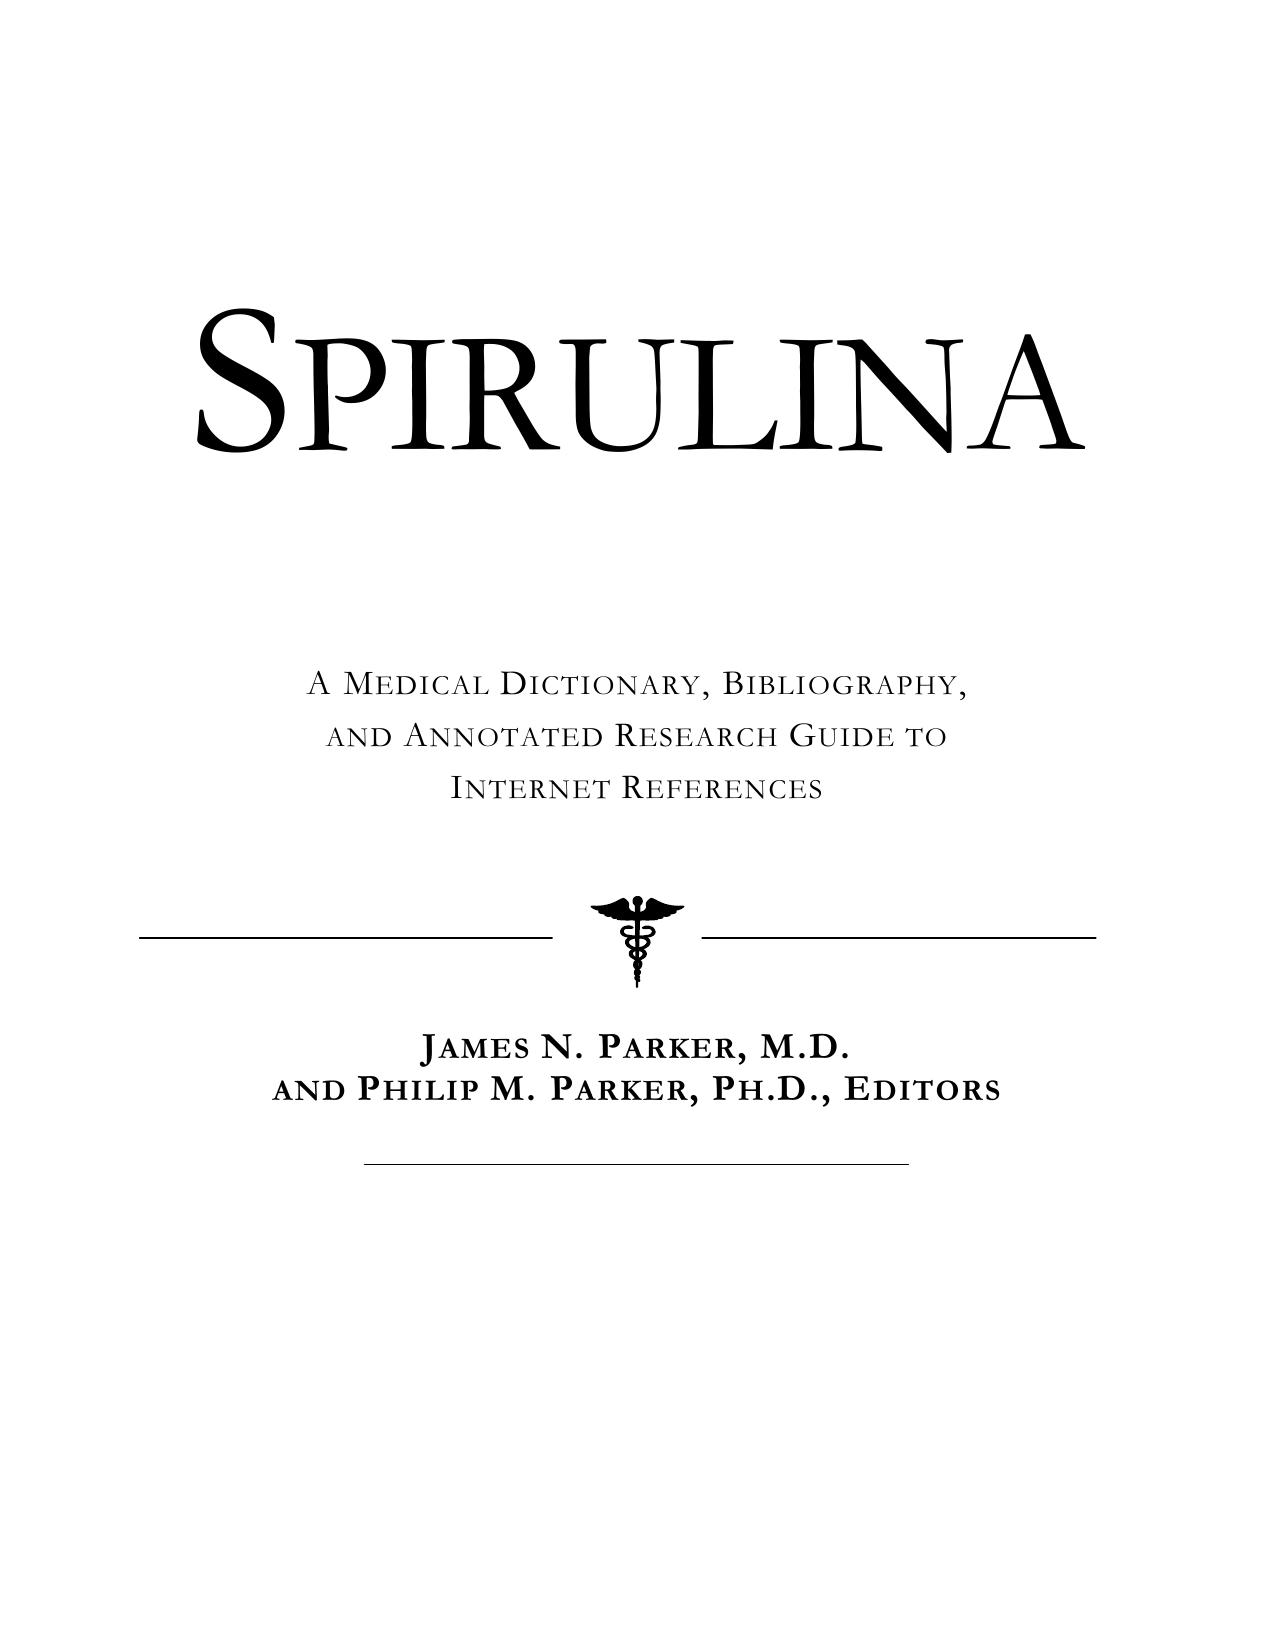 Spirulina - A Medical Dictionary, Bibliography, and Annotated Research Guid to Internet References